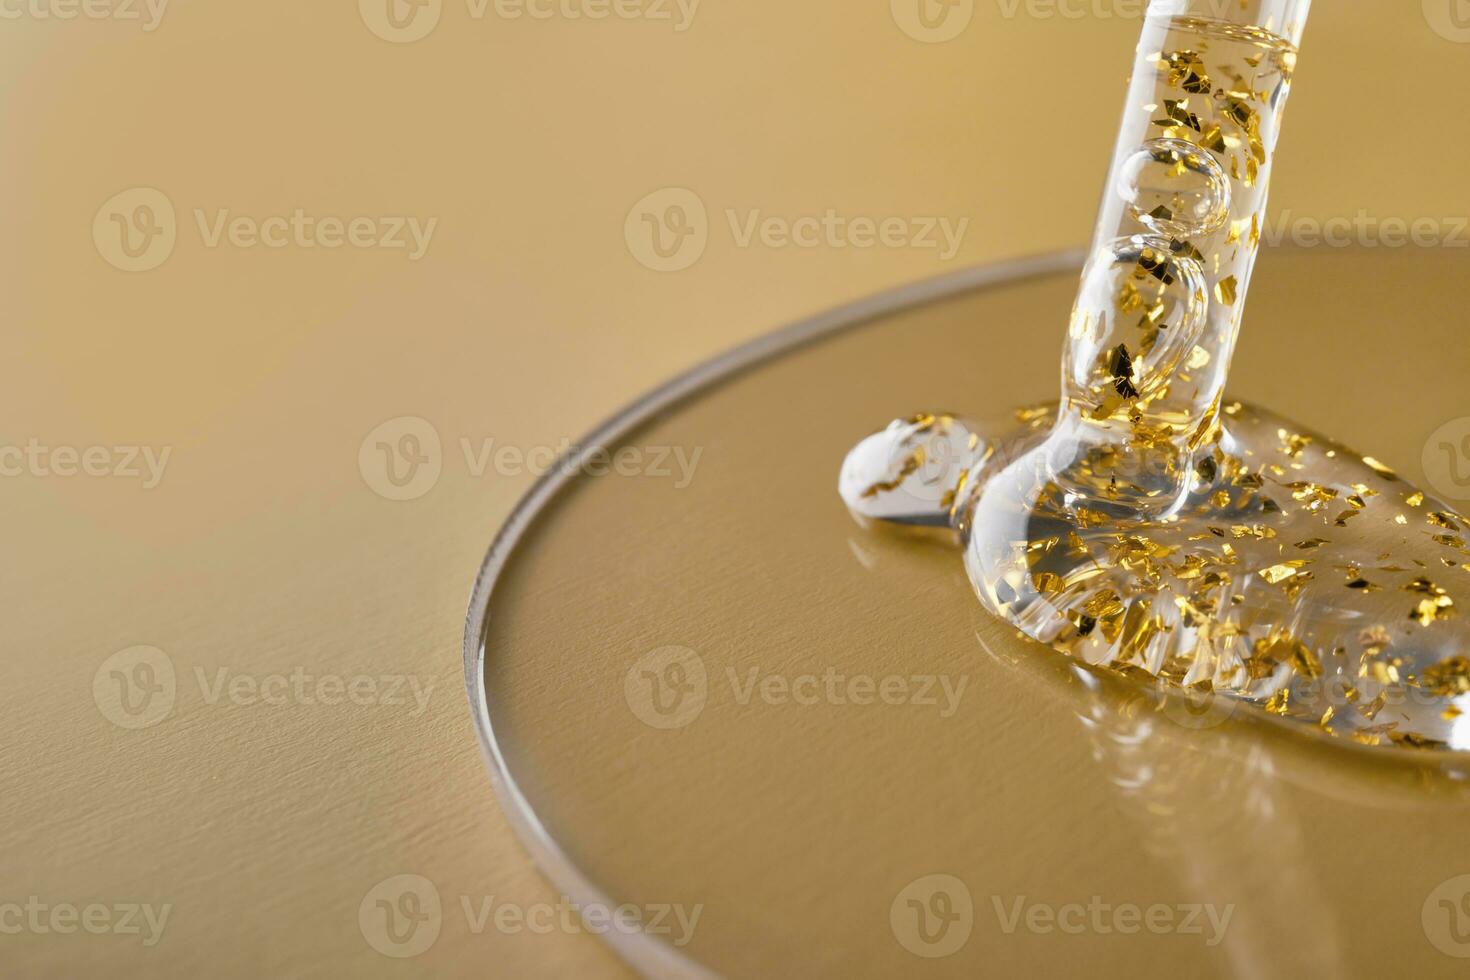 Pipette and gel cosmetic products with gold in a Petri dish on beige background photo